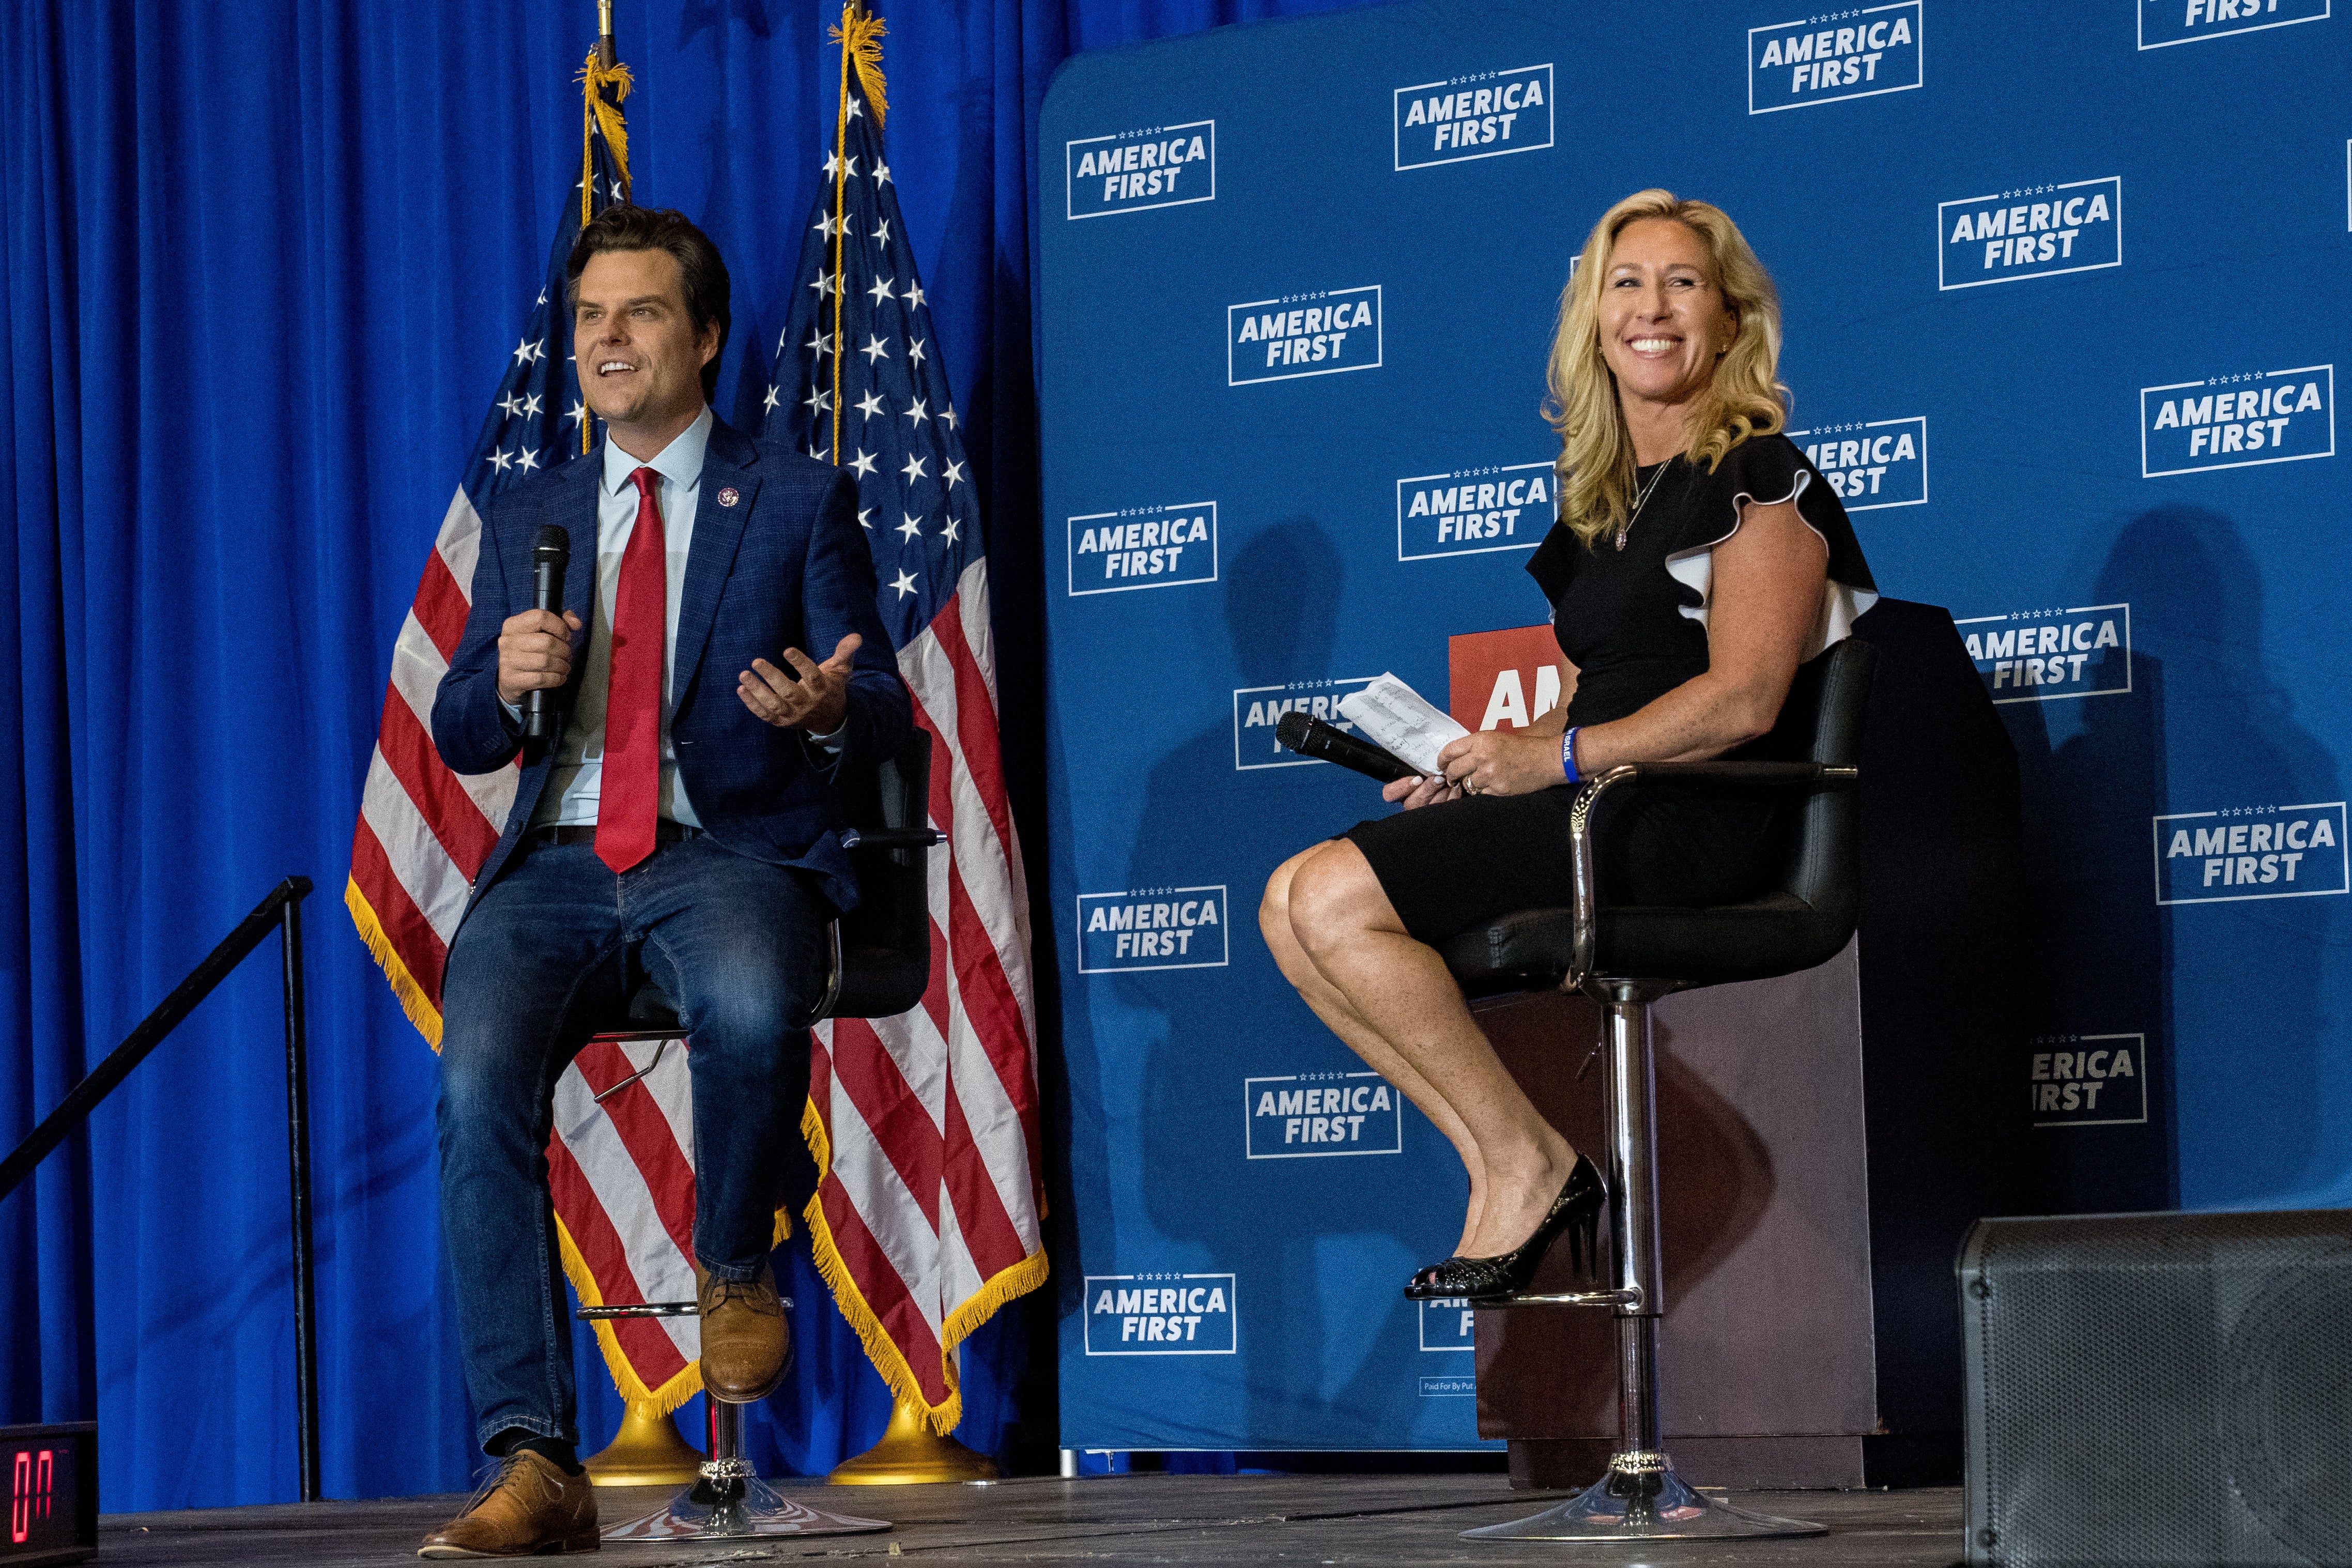 Matt Gaetz and Marjorie Taylor Greene appear at a joint event on 27 May.